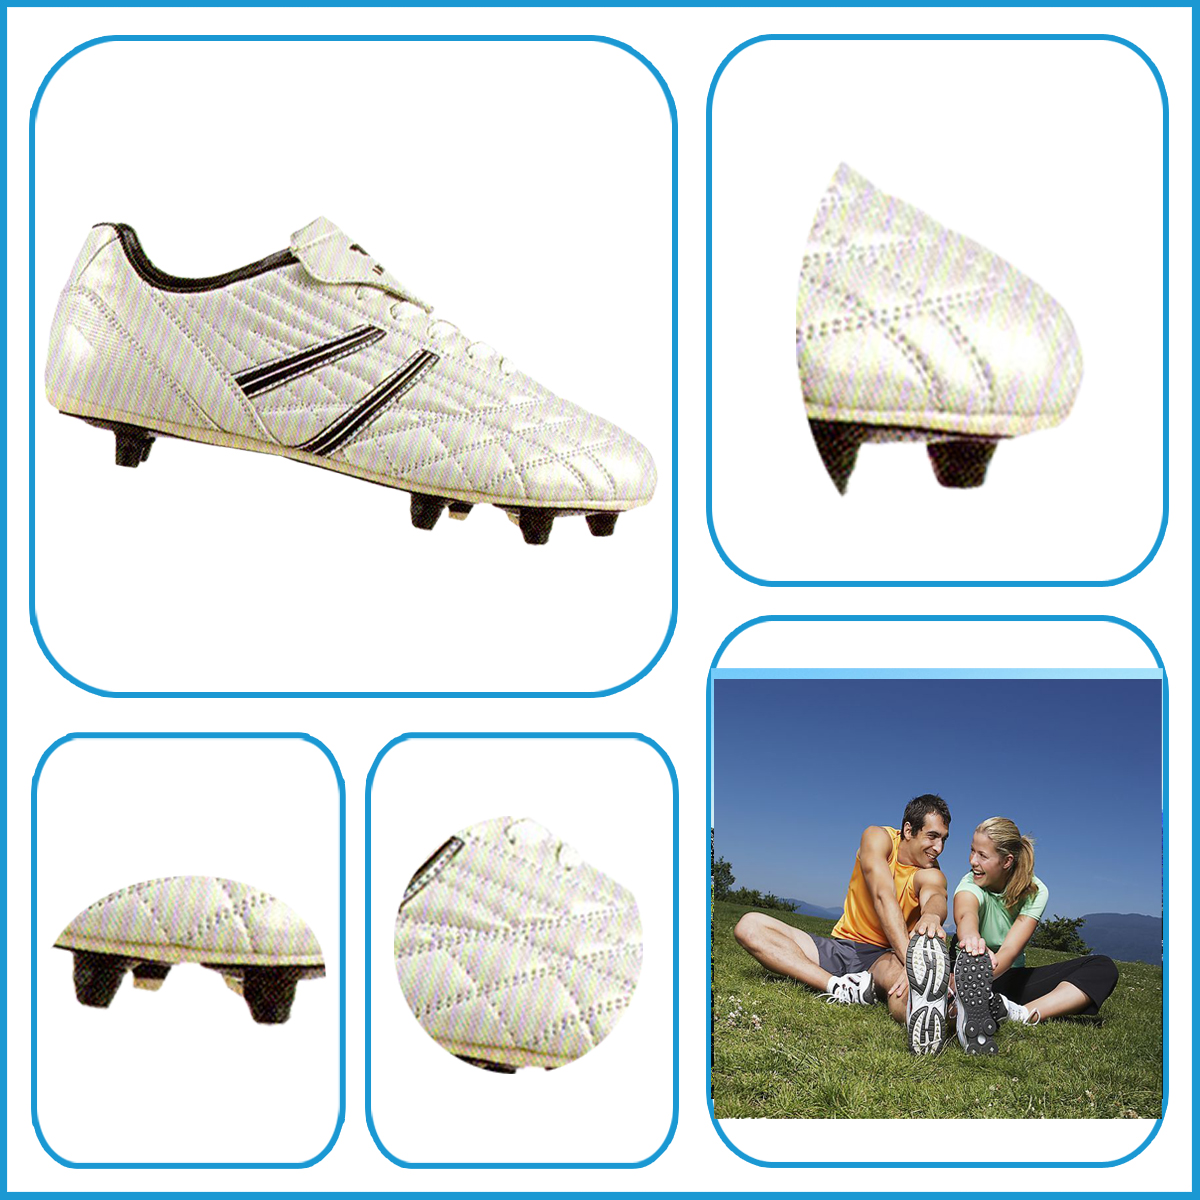 Stylish Men's White Mirror PU Football Shoes with Soft PU Lining and Professional Outsole